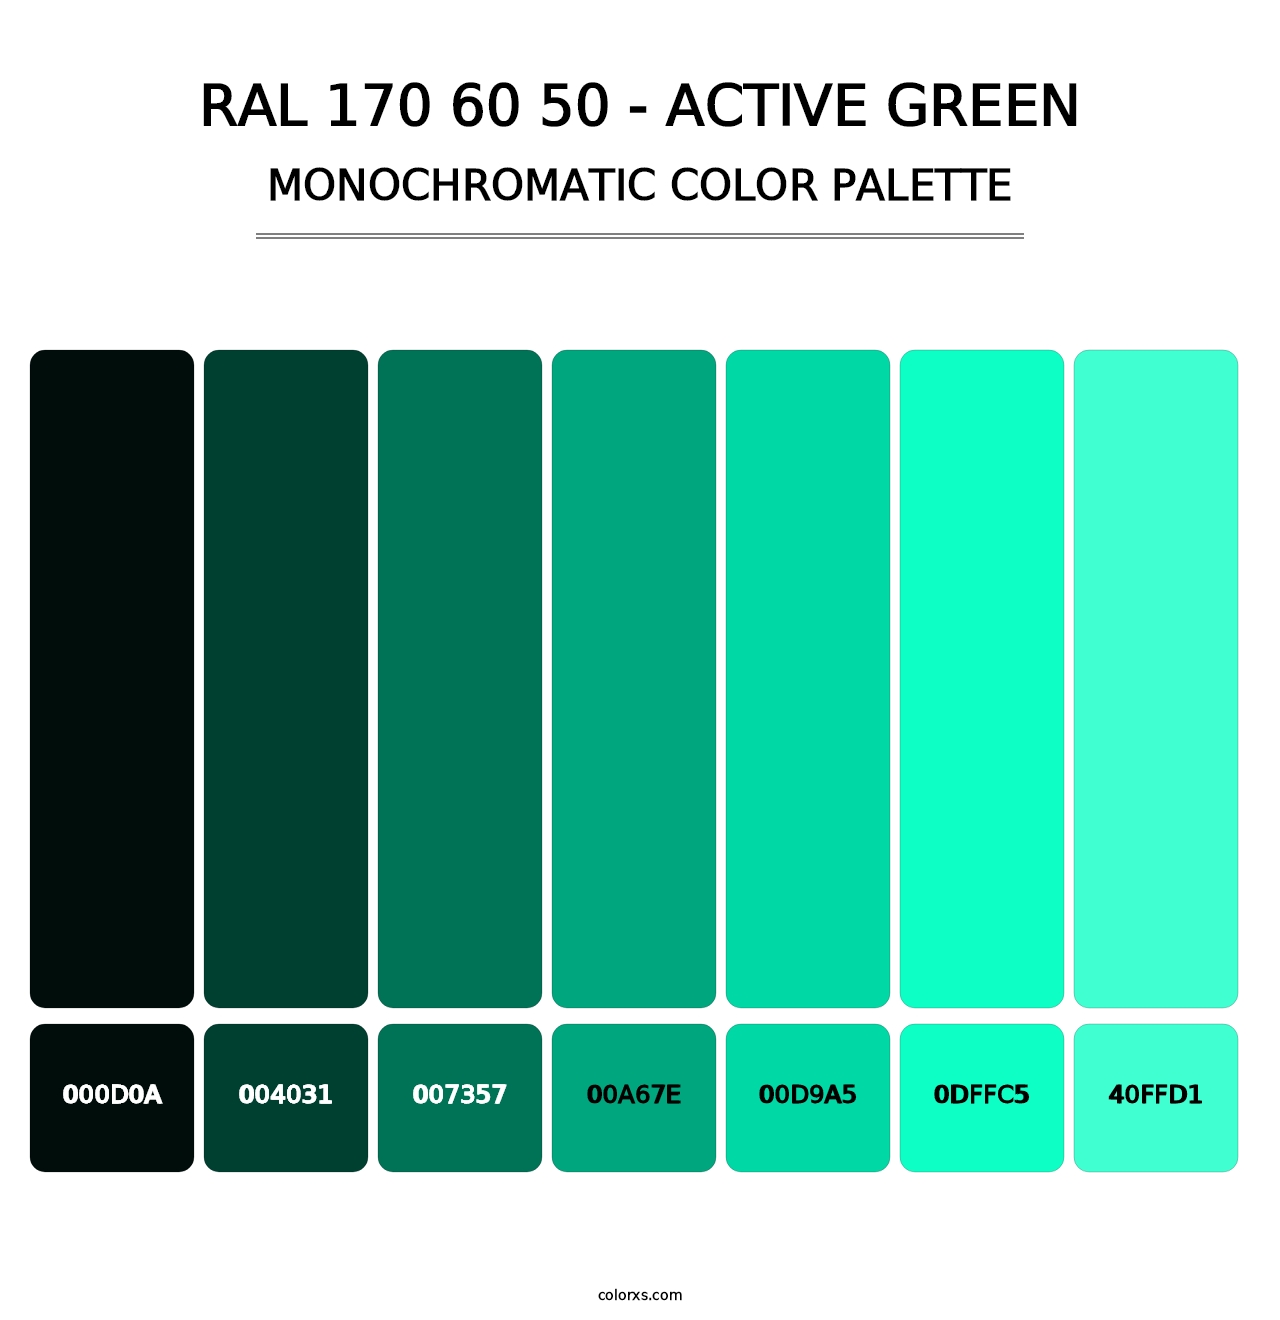 RAL 170 60 50 - Active Green - Monochromatic Color Palette